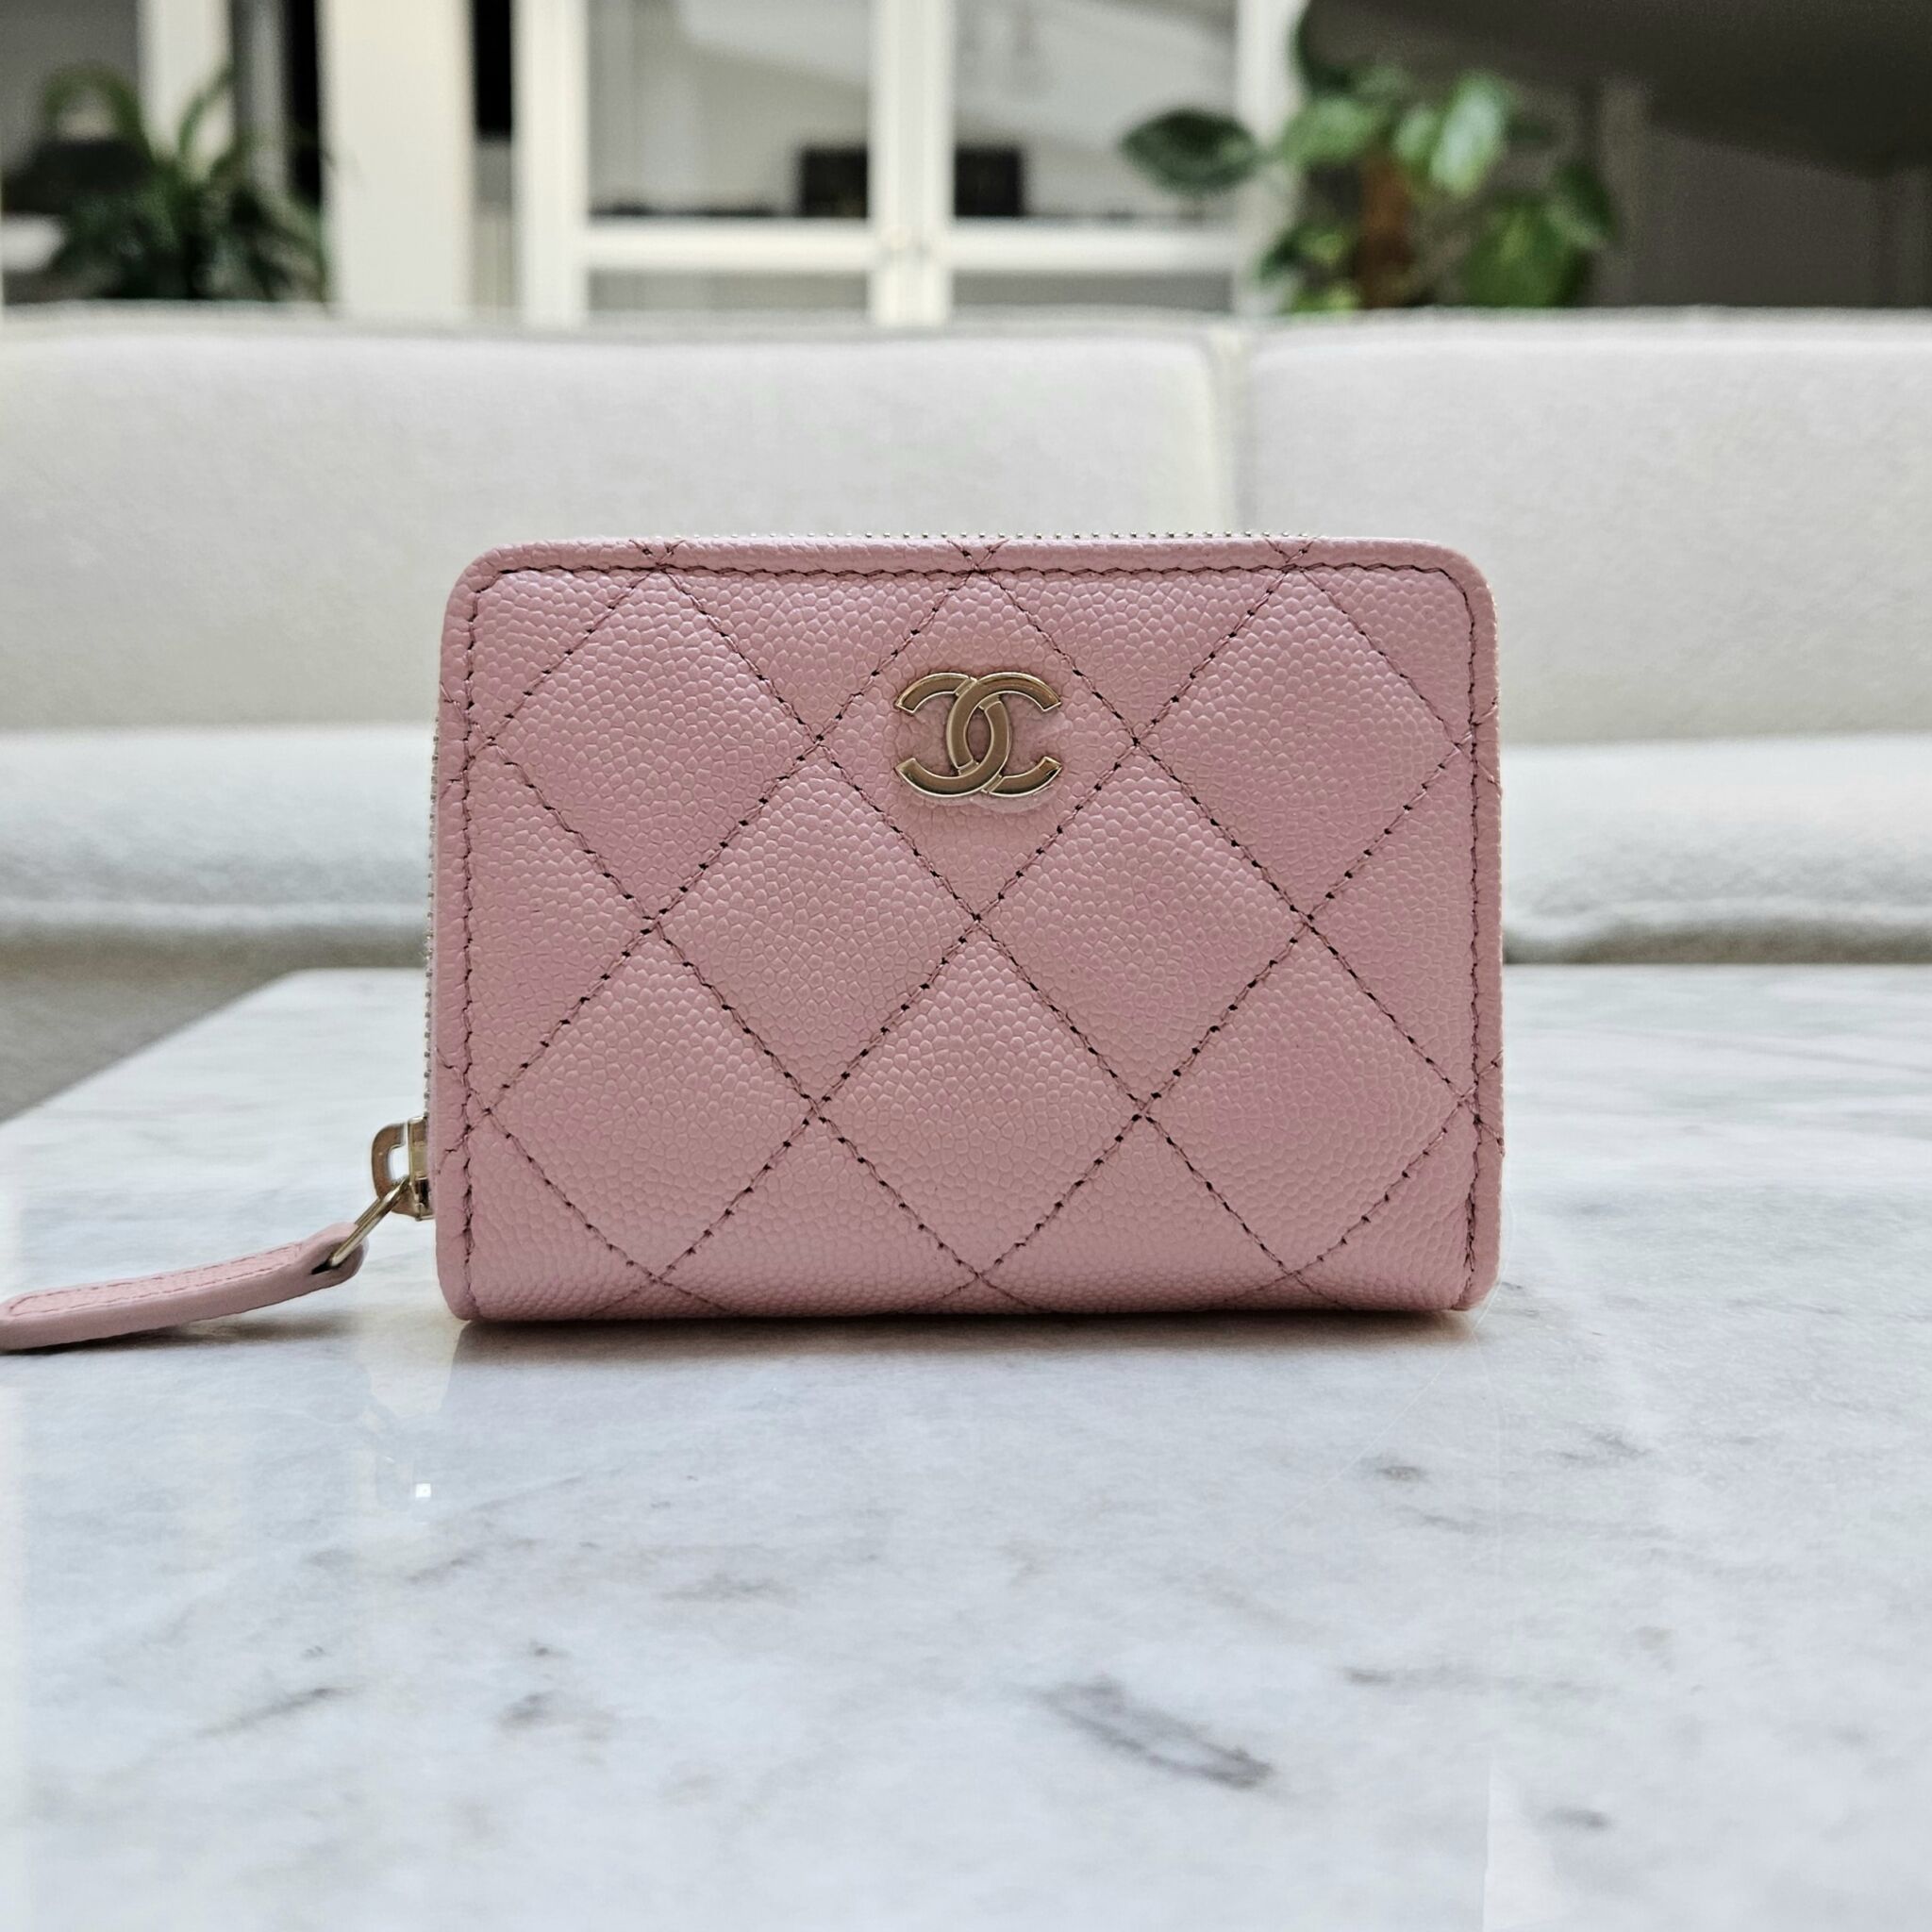 CHANEL, Bags, Chanel Quilted Zip Card Holder Light Pink Authentic